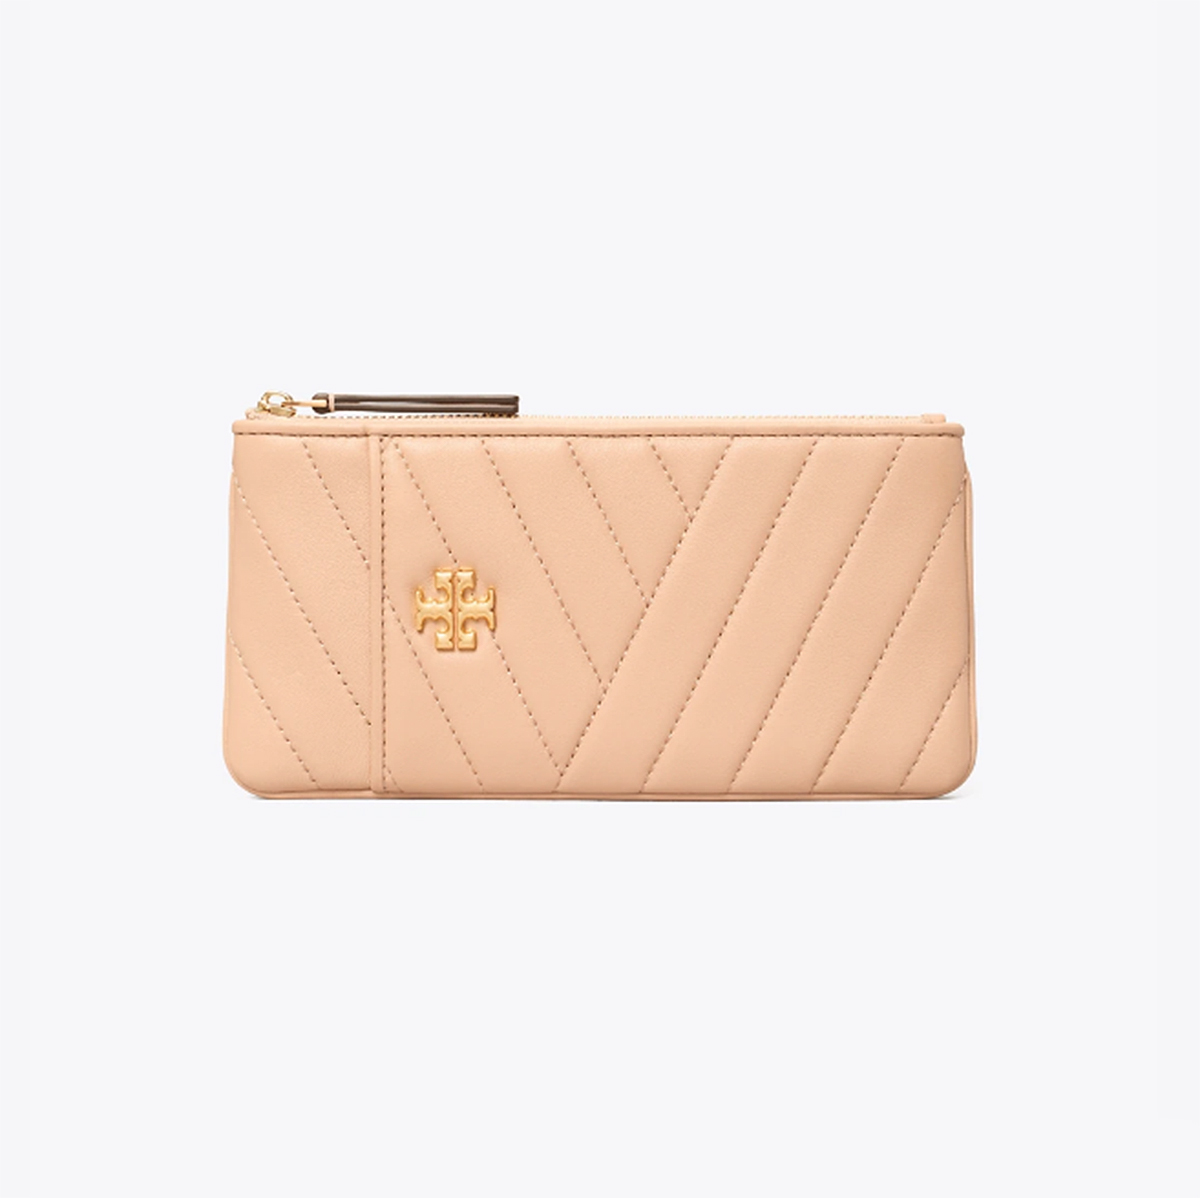 Tory Burch's nieces have a collection of cool handbags that won't break the  millennial wallet